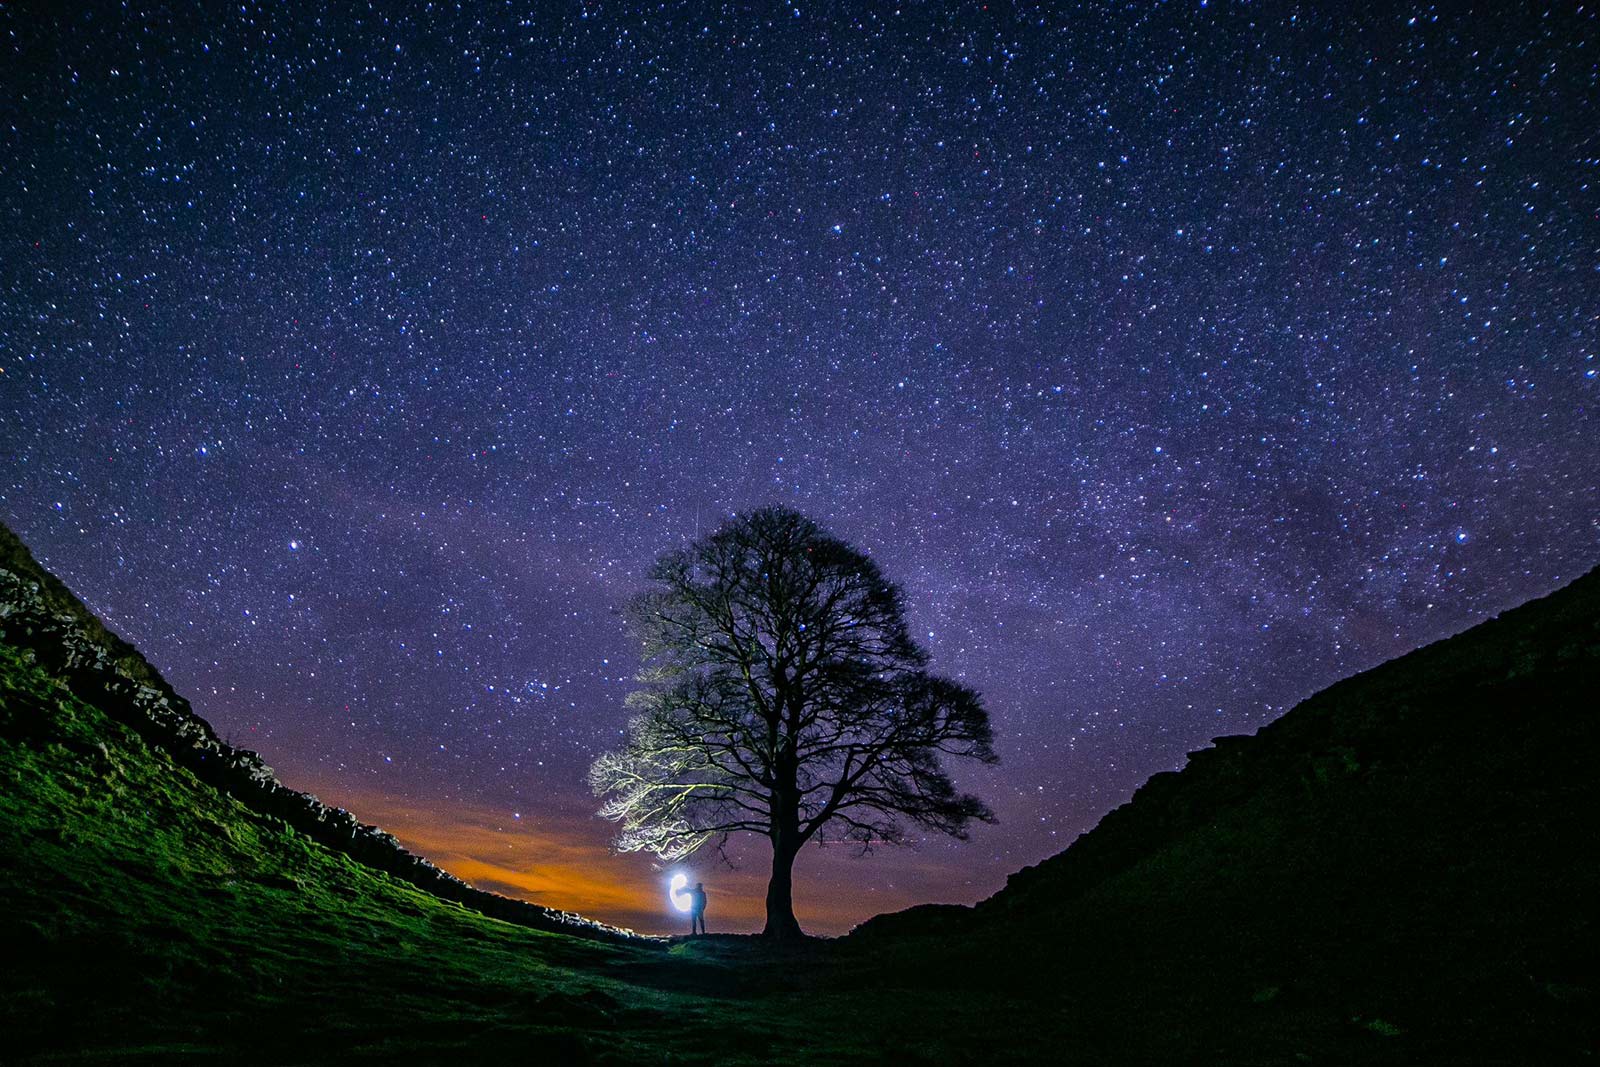 A photograph taken by Kris Hodgetts at Sycamore Gap at nighttime in 2019